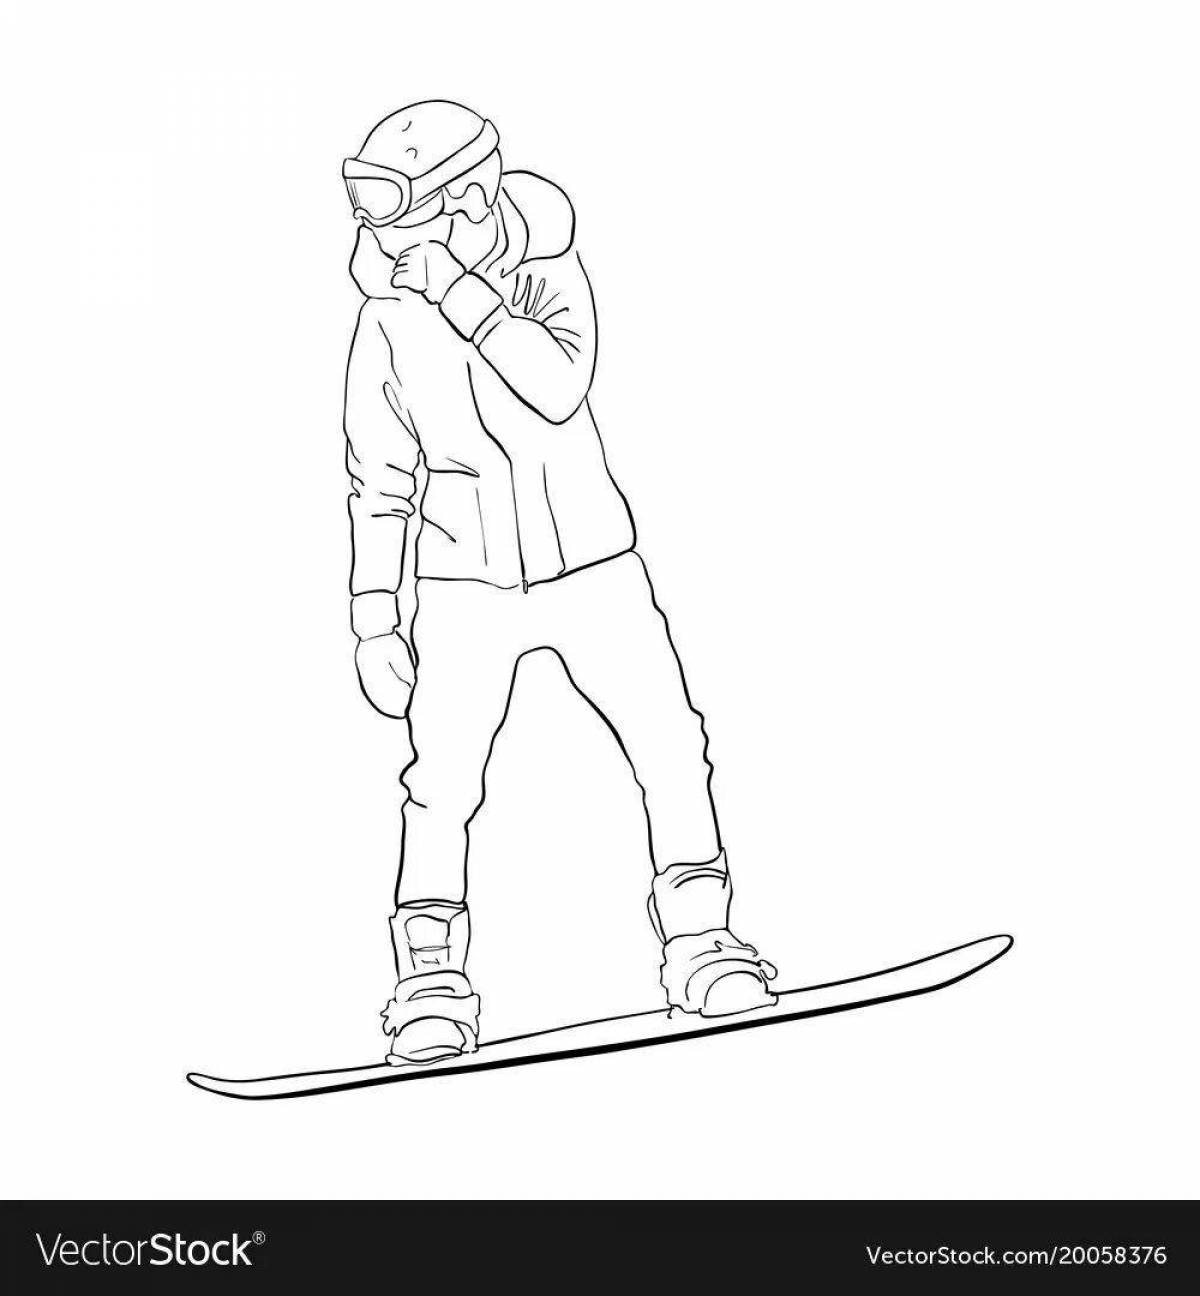 Wonderful snowboarder coloring pages for kids